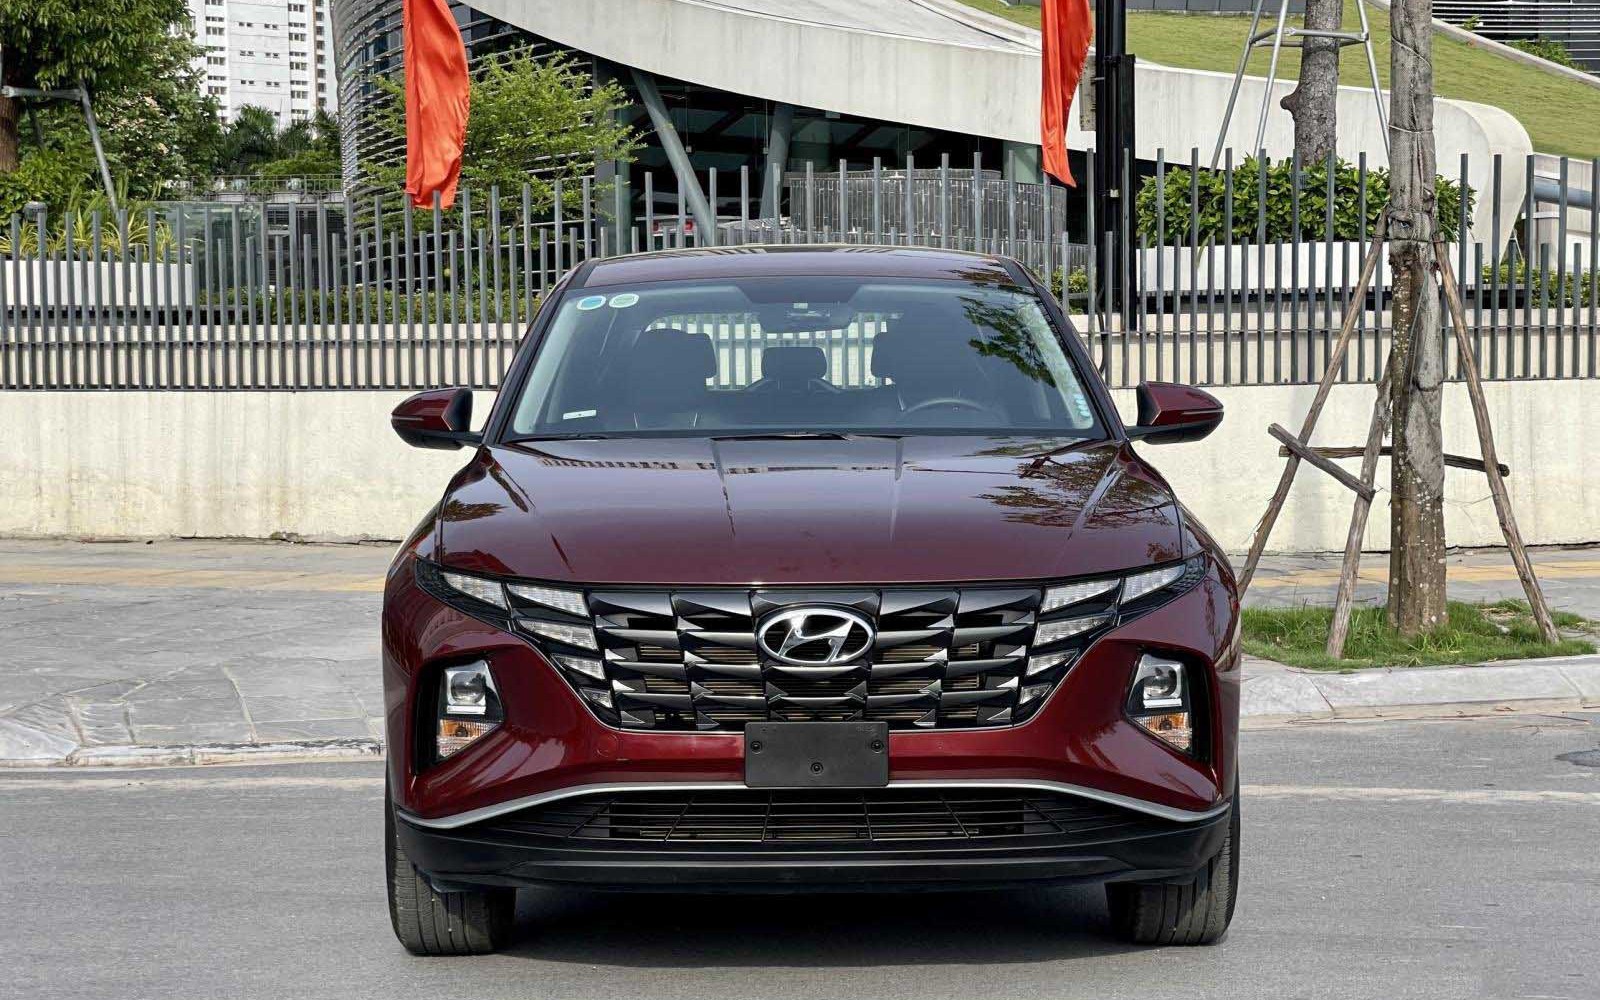 Running 11,000km, car owners sell Hyundai Tucson Standard 2022 more expensive than a new car by 100 million